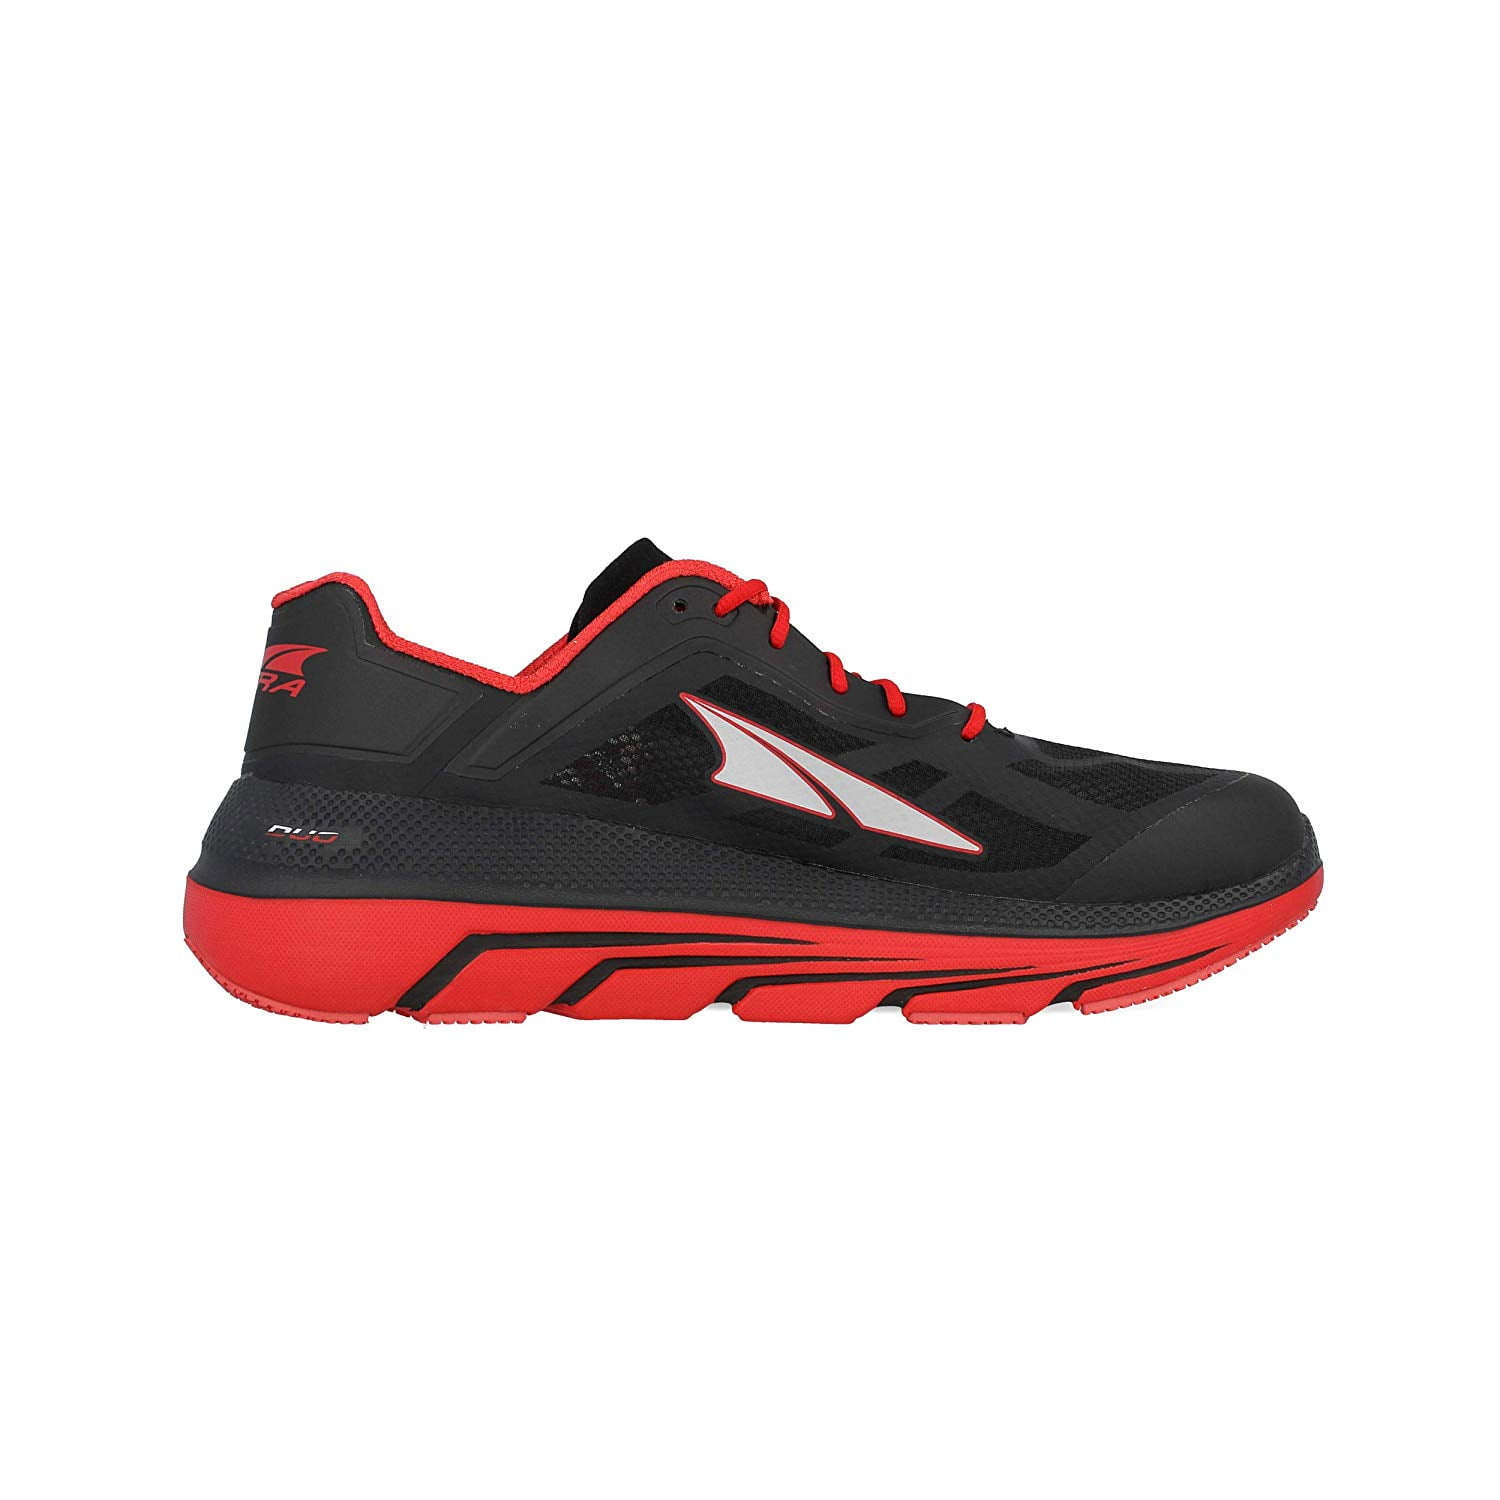 Altra Running Athletic Shoes